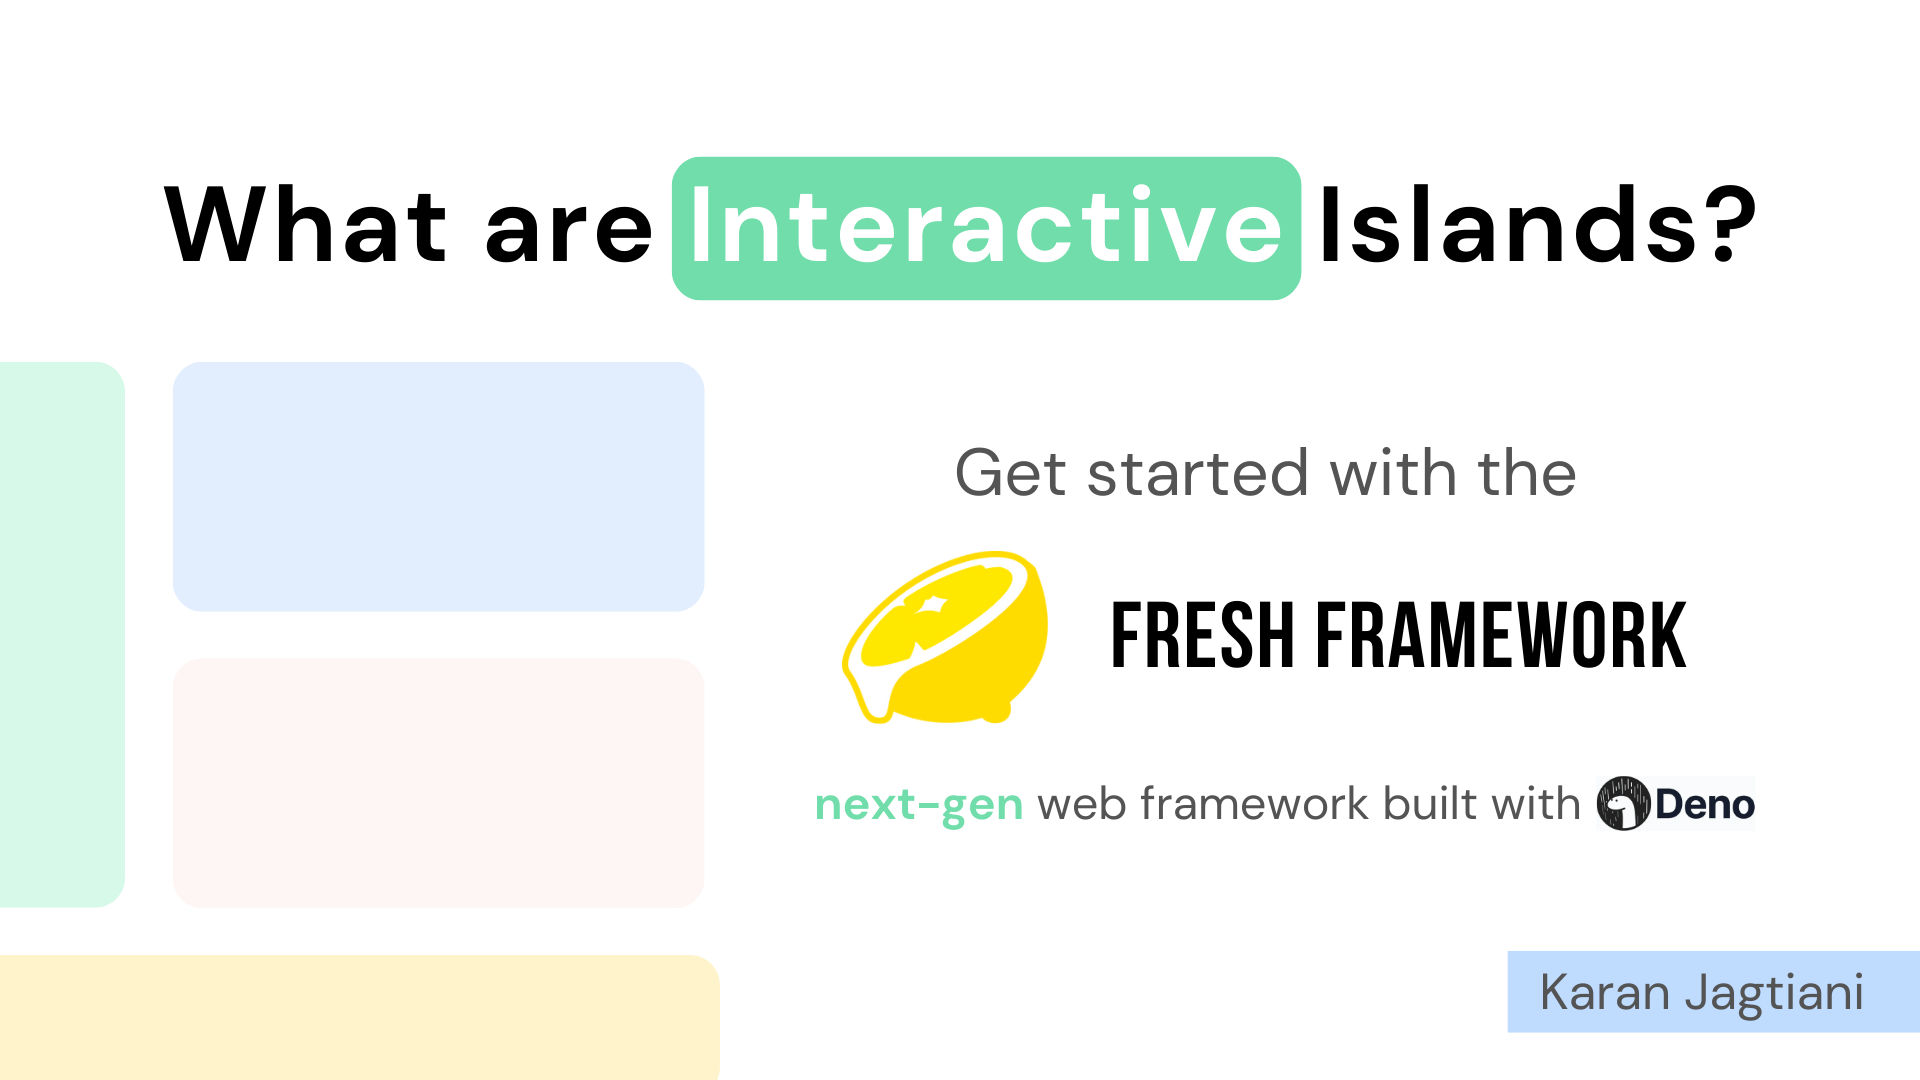 What are Interactive Islands? Get started with the Fresh framework!